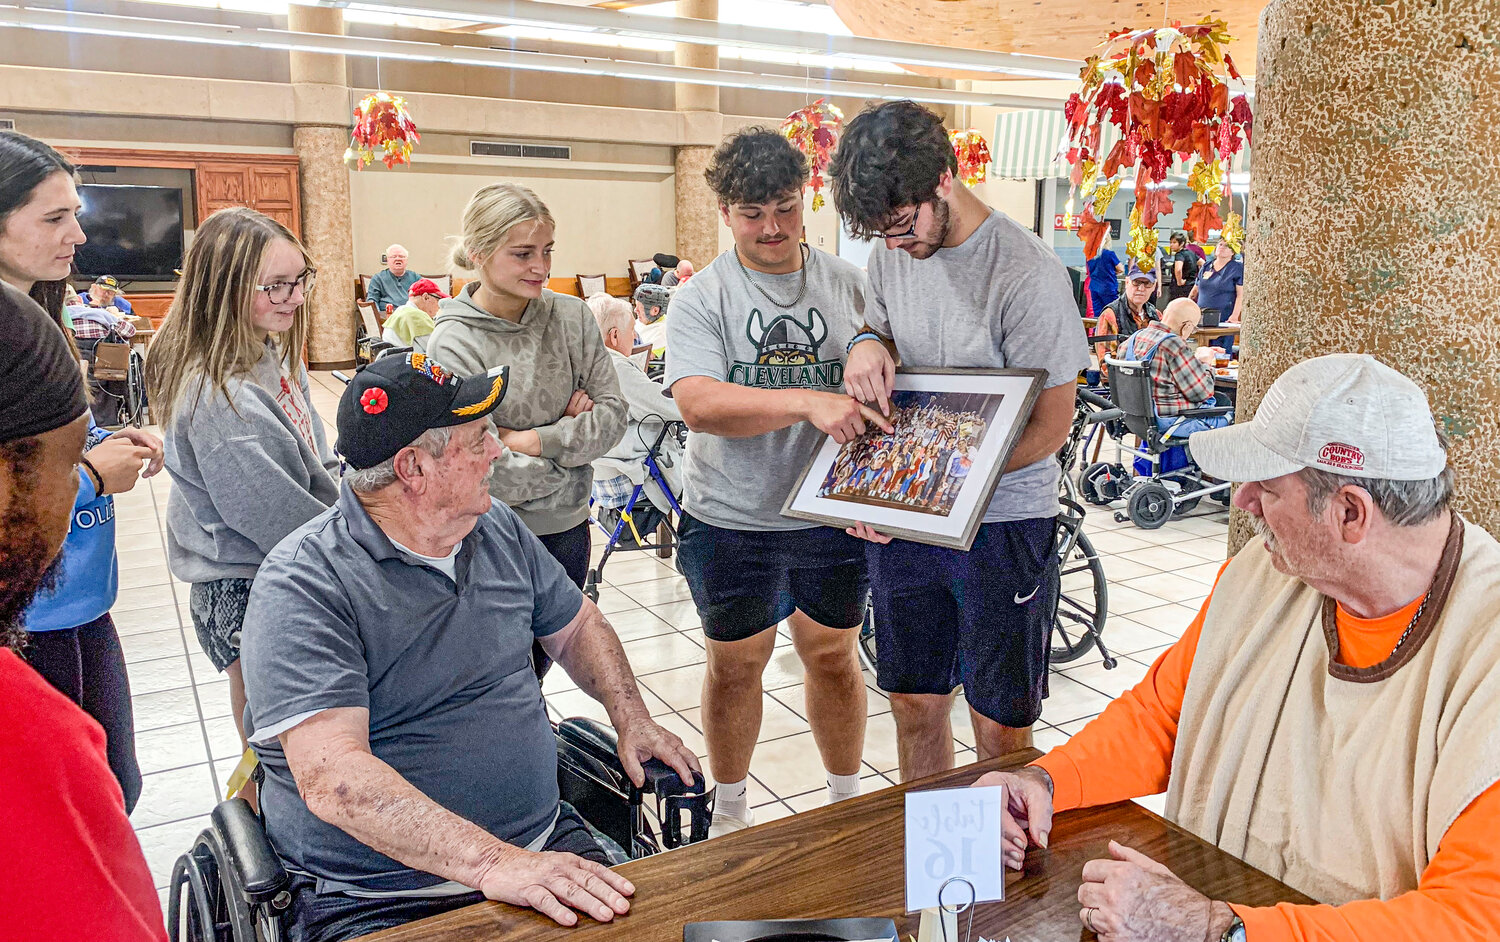 Students from Mexico High School showed a picture from Military Appreciation Night on Sept. 8, to Veterans at the Missouri Veterans’ Home on Monday, Sept. 25.